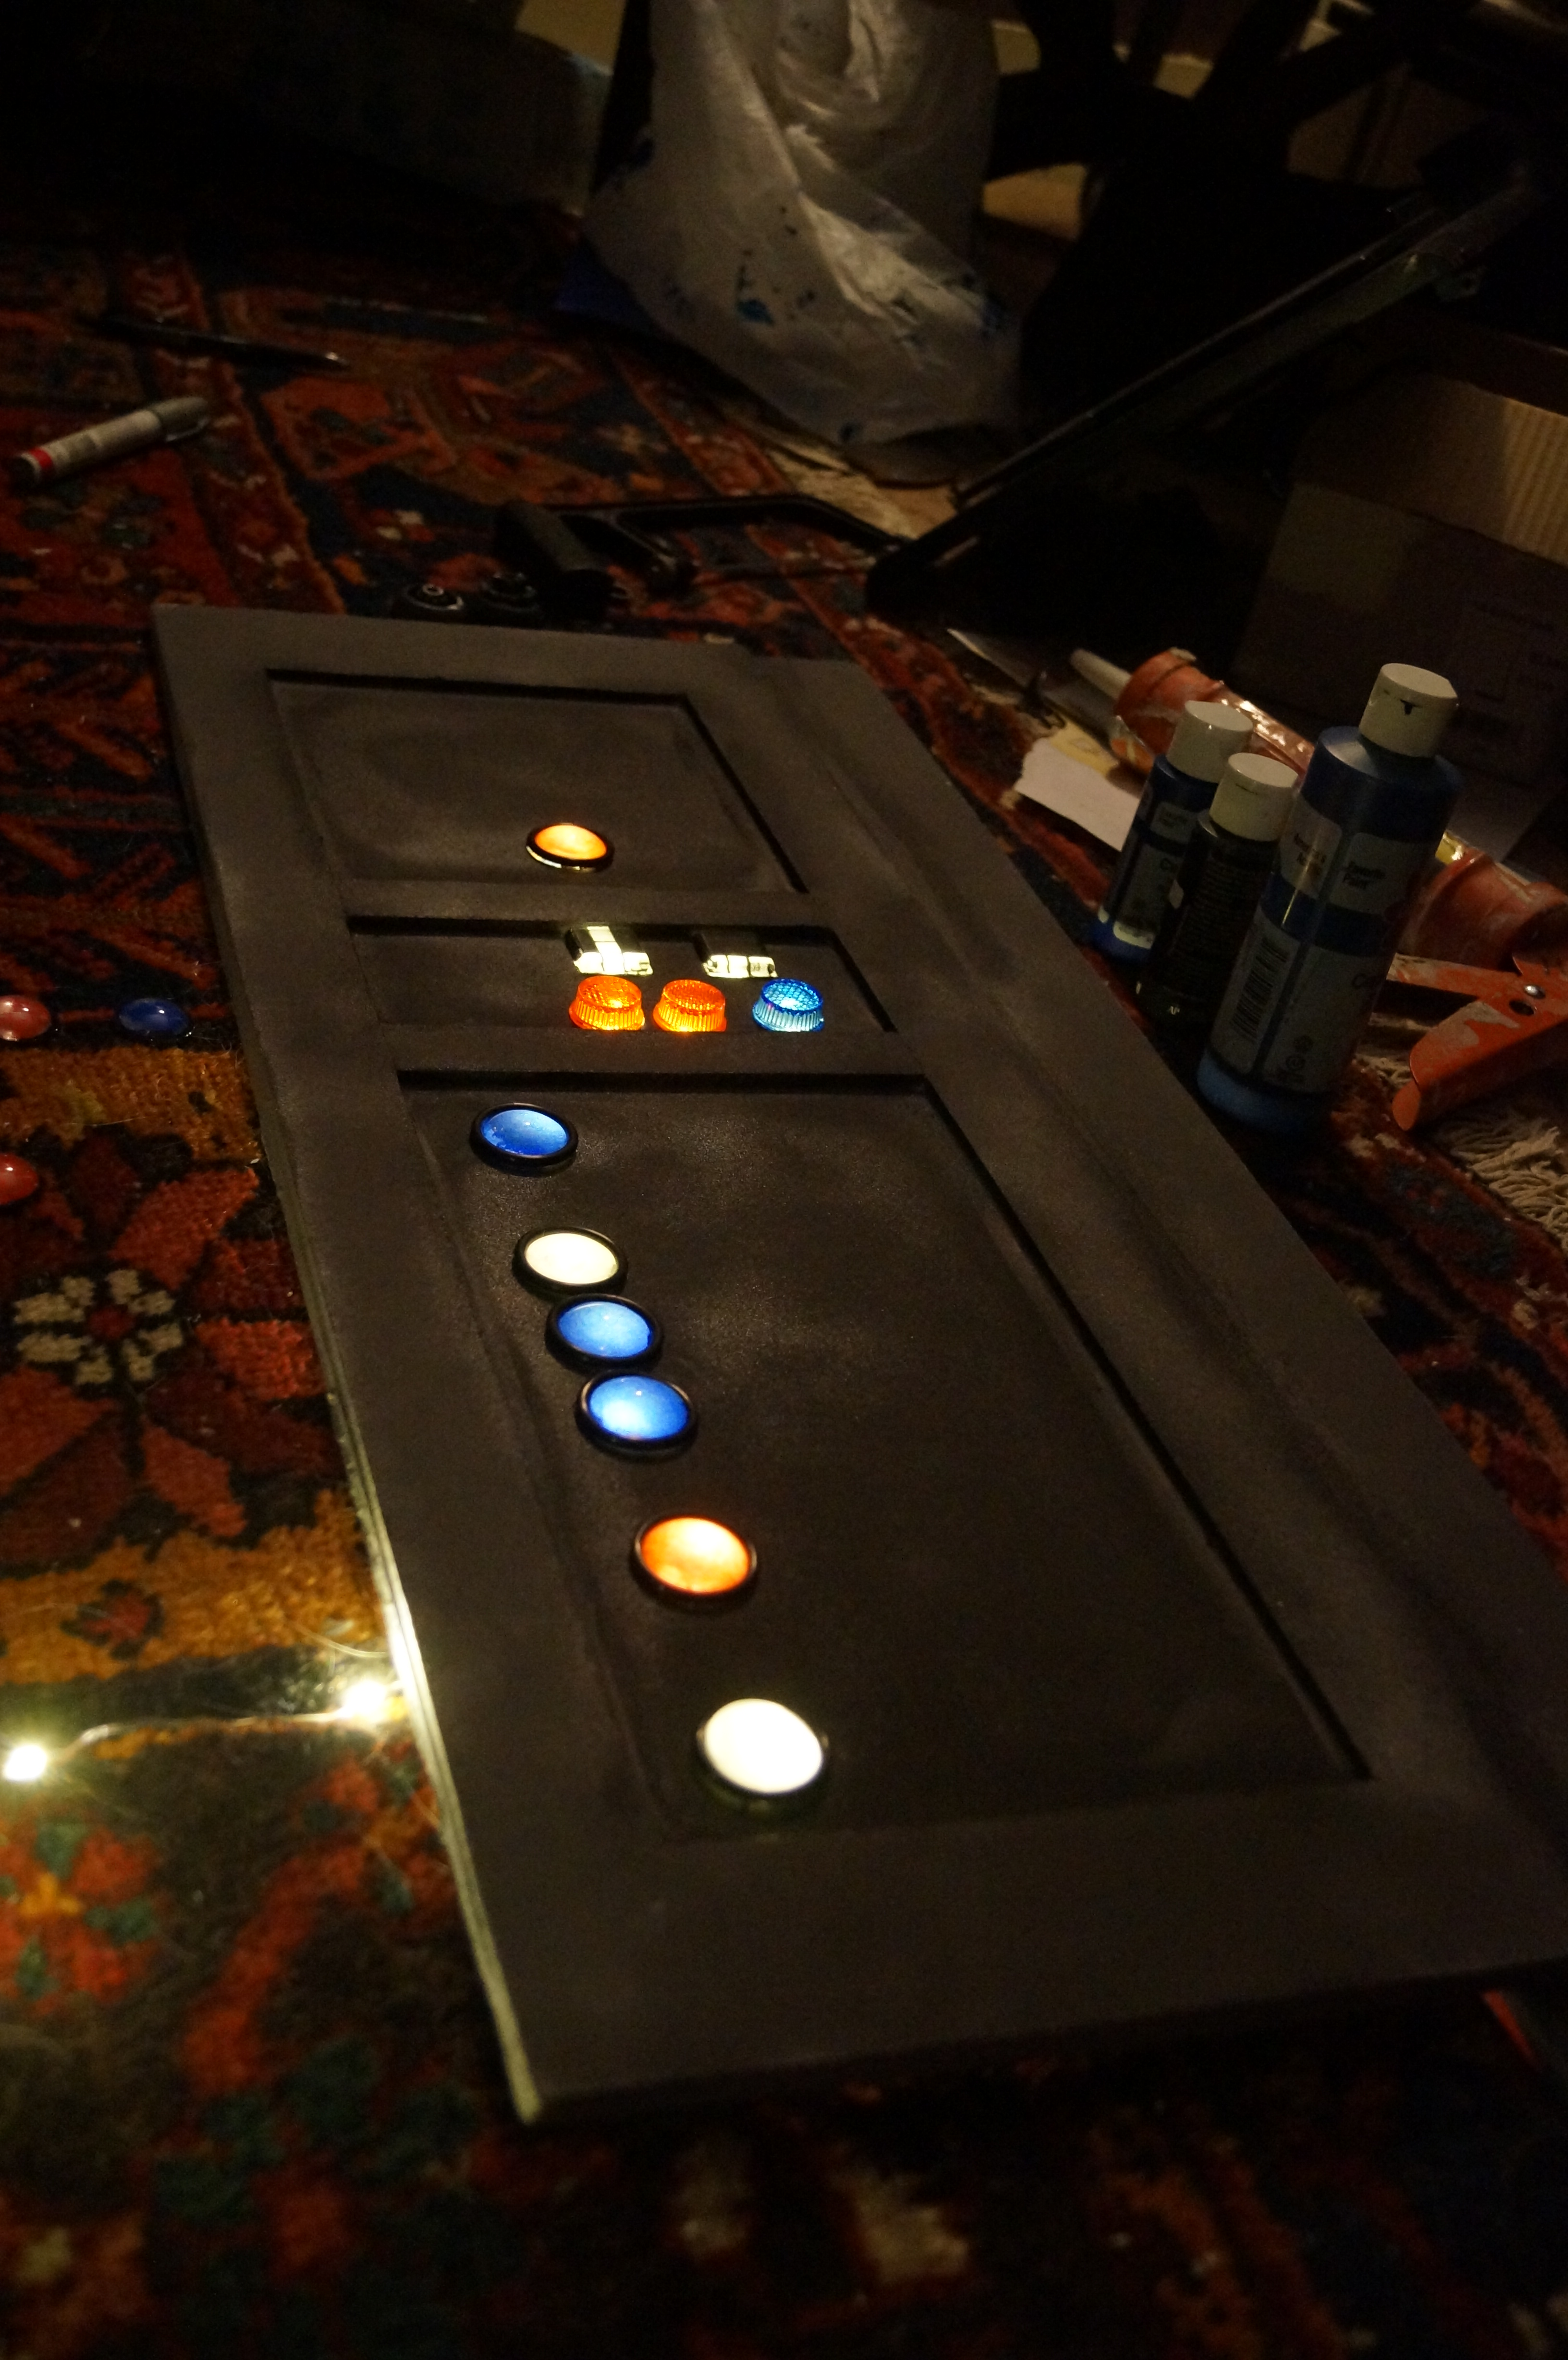 It glows! Simple led string taped to the back side of the panel.